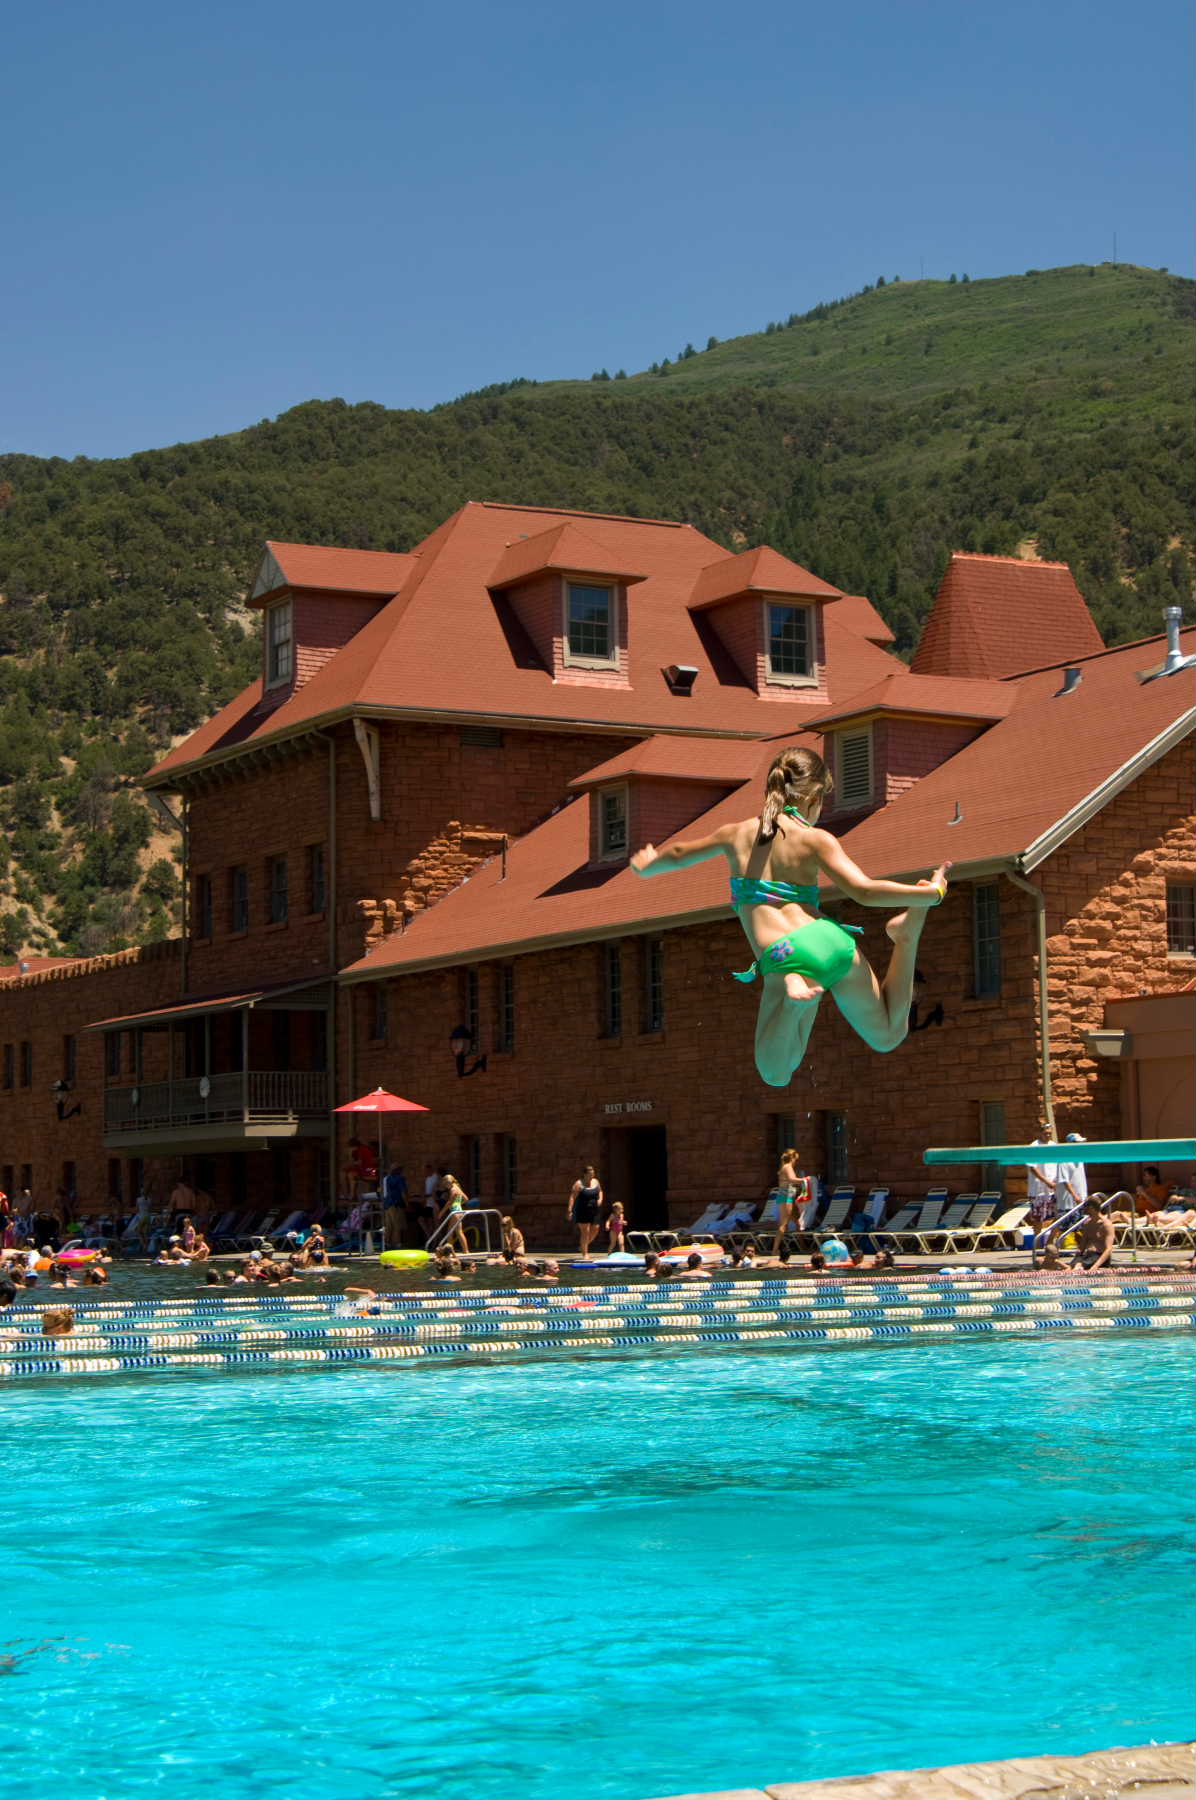 Glenwood Hot Springs Pool has been welcoming guests to play and have fun for 125 years